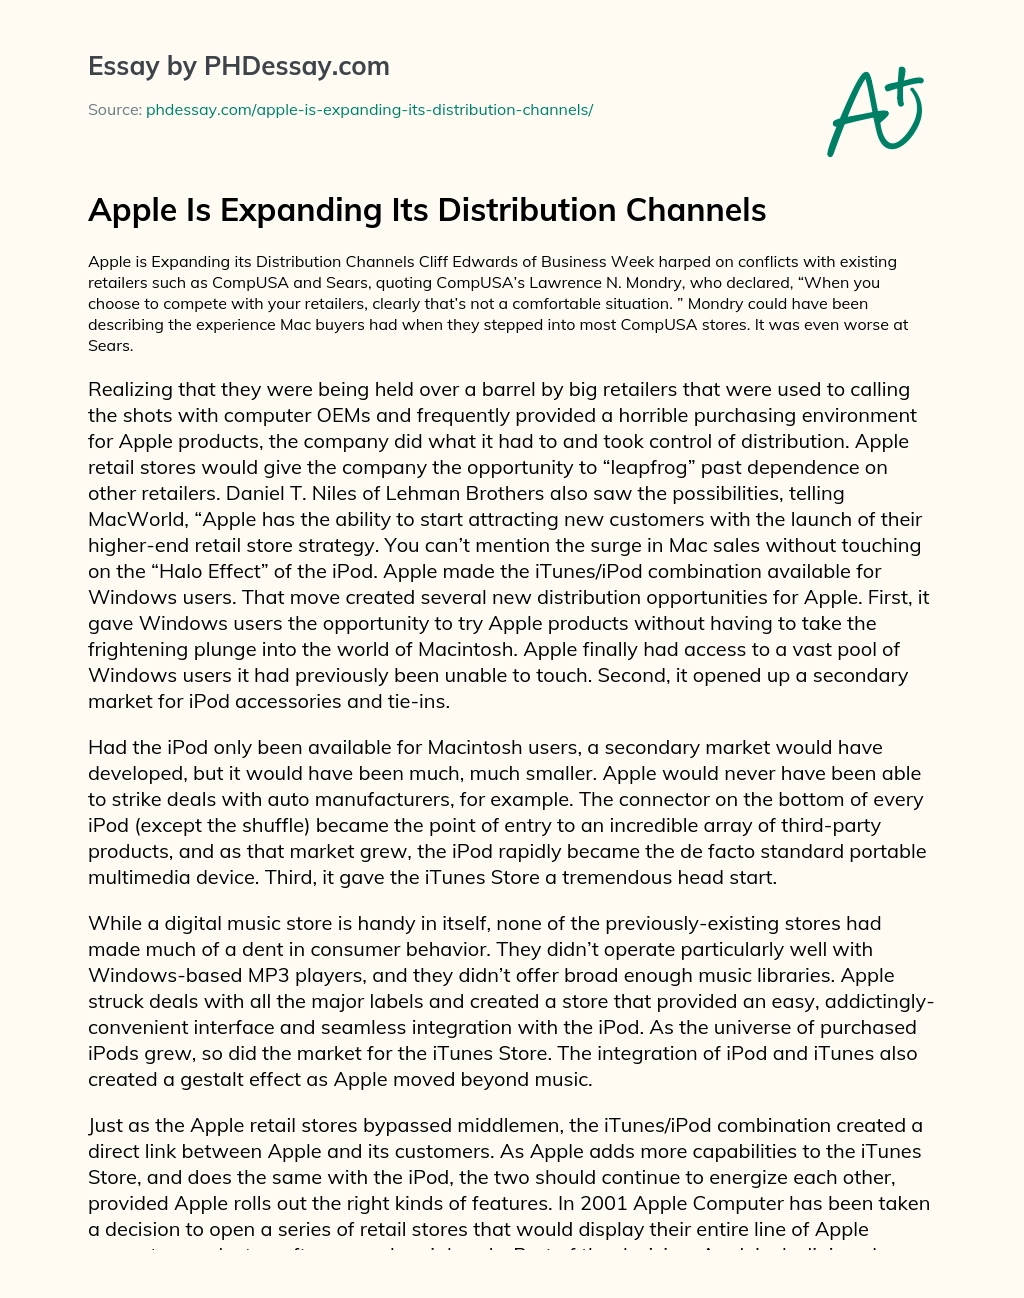 Apple Is Expanding Its Distribution Channels essay